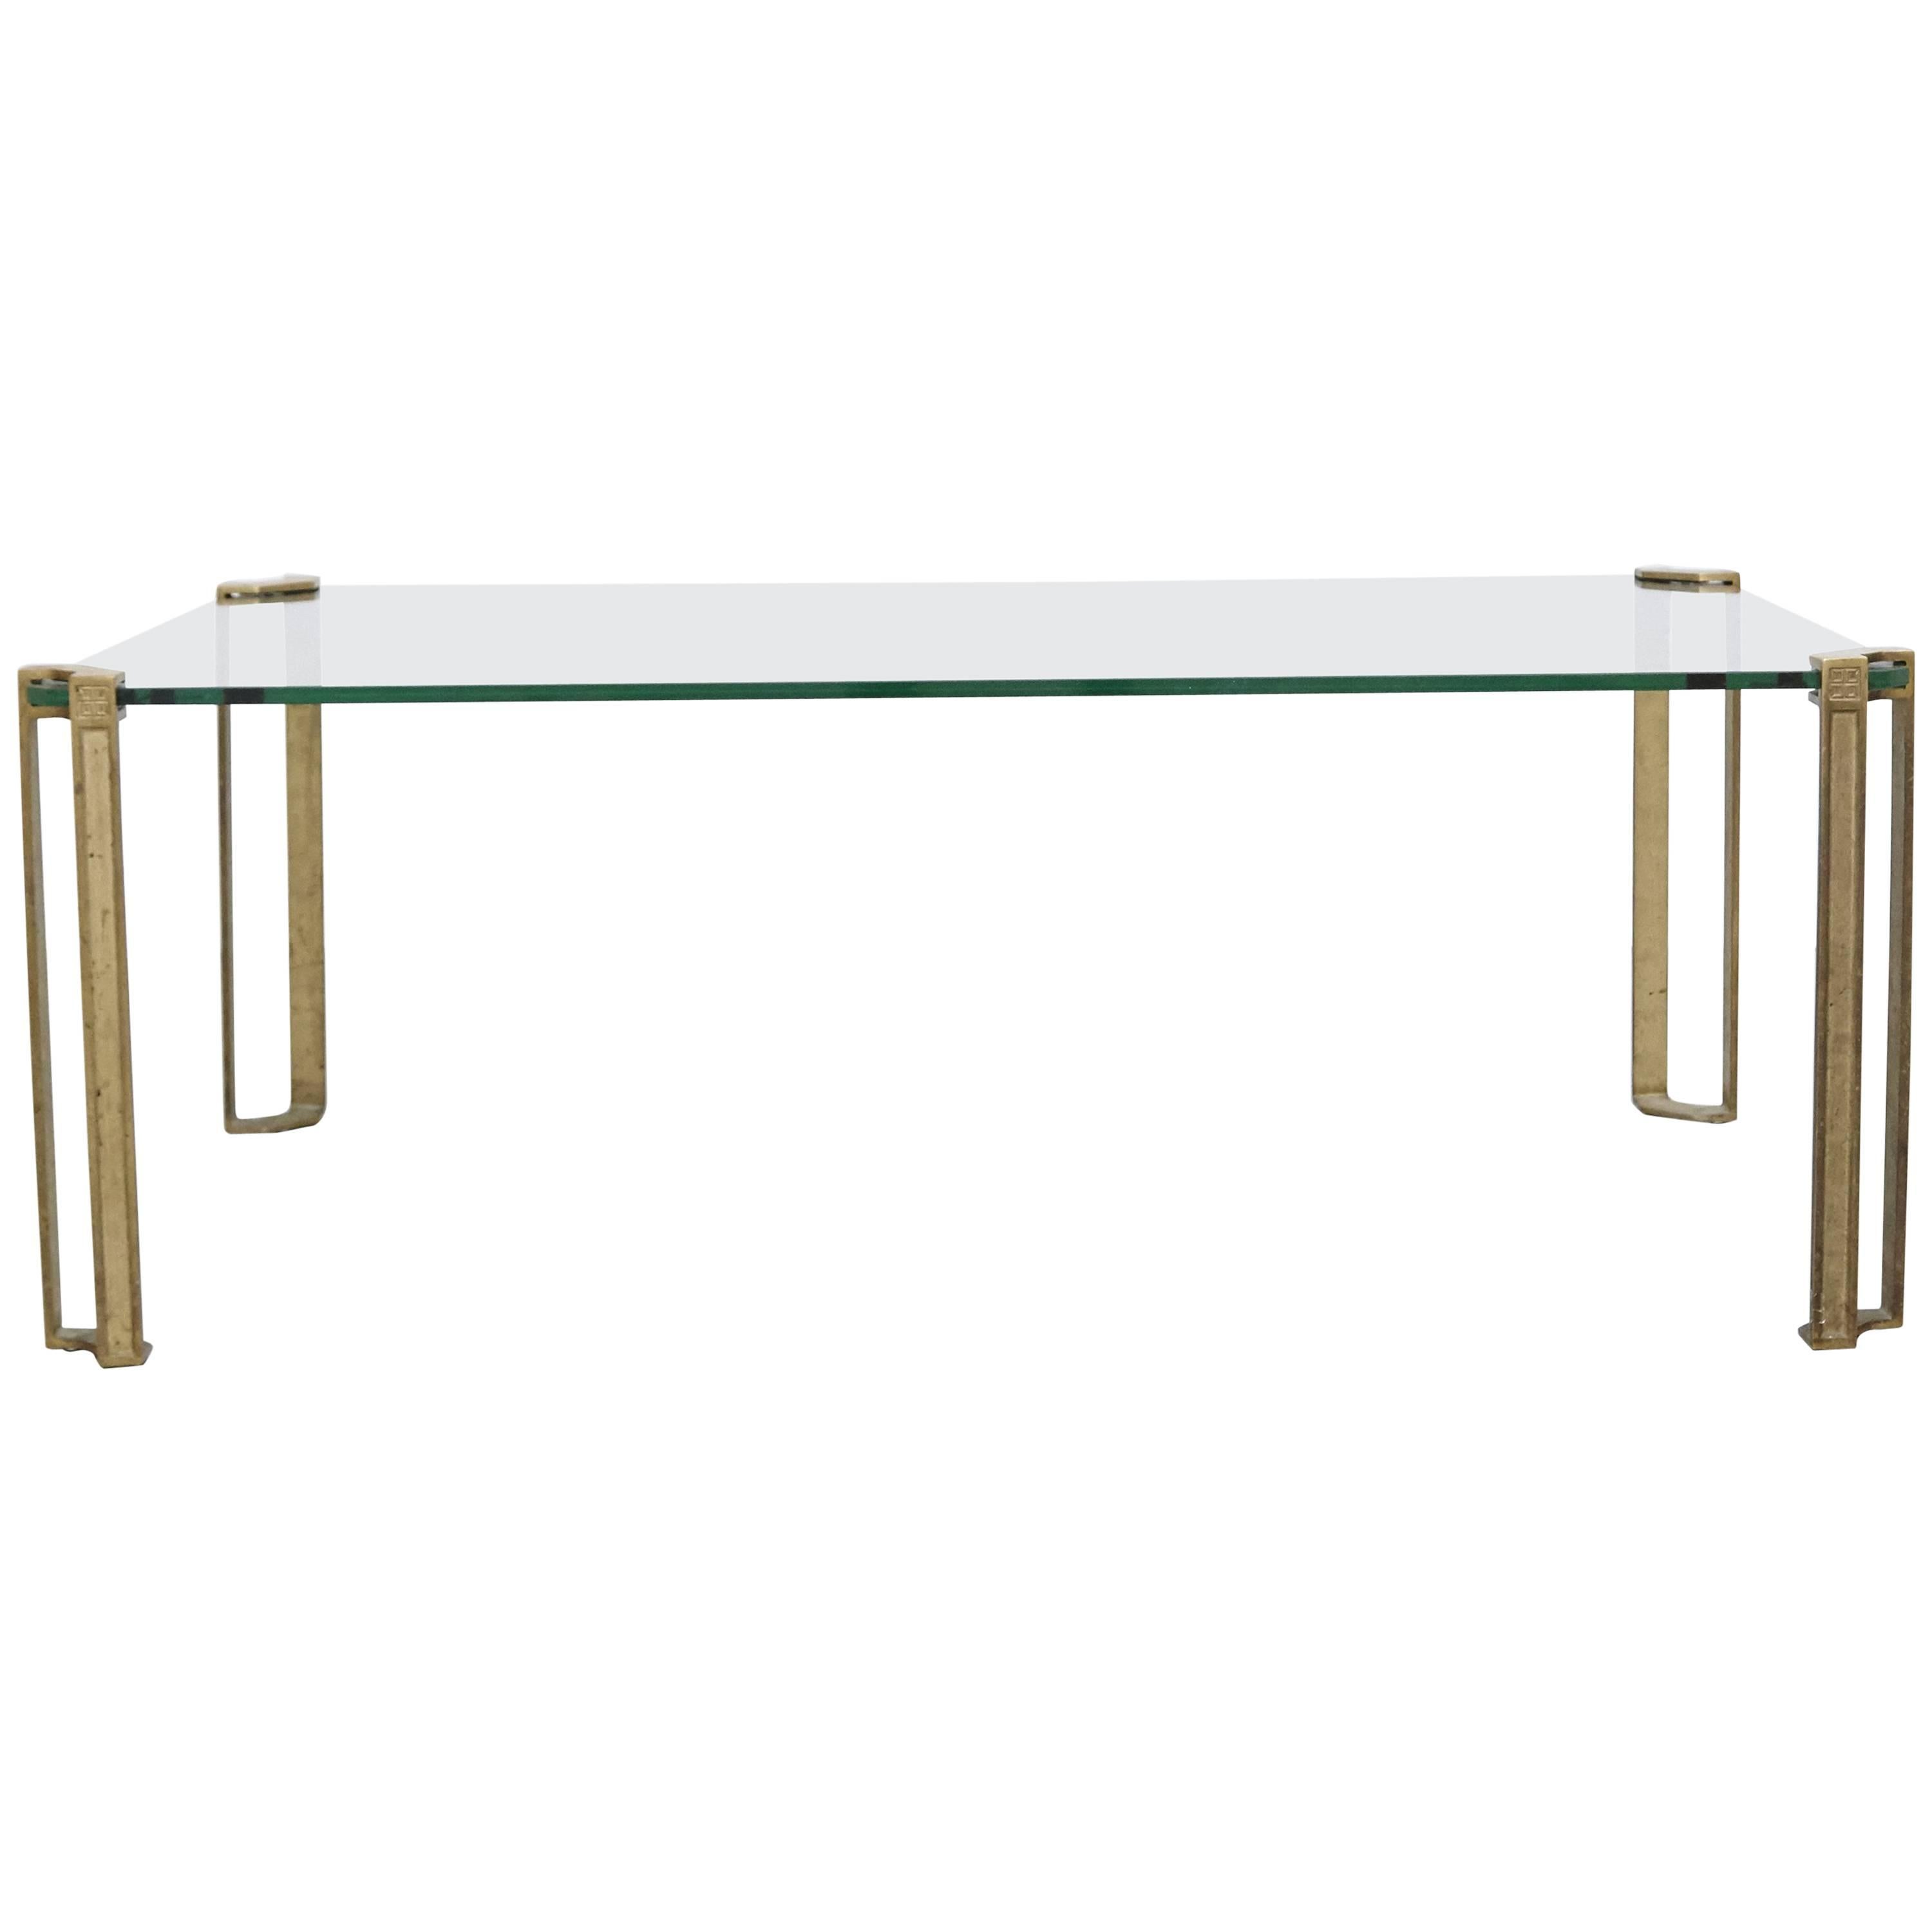 Peter Ghyczy Mid Century Modern Brass And Glass Low Table, circa 1970